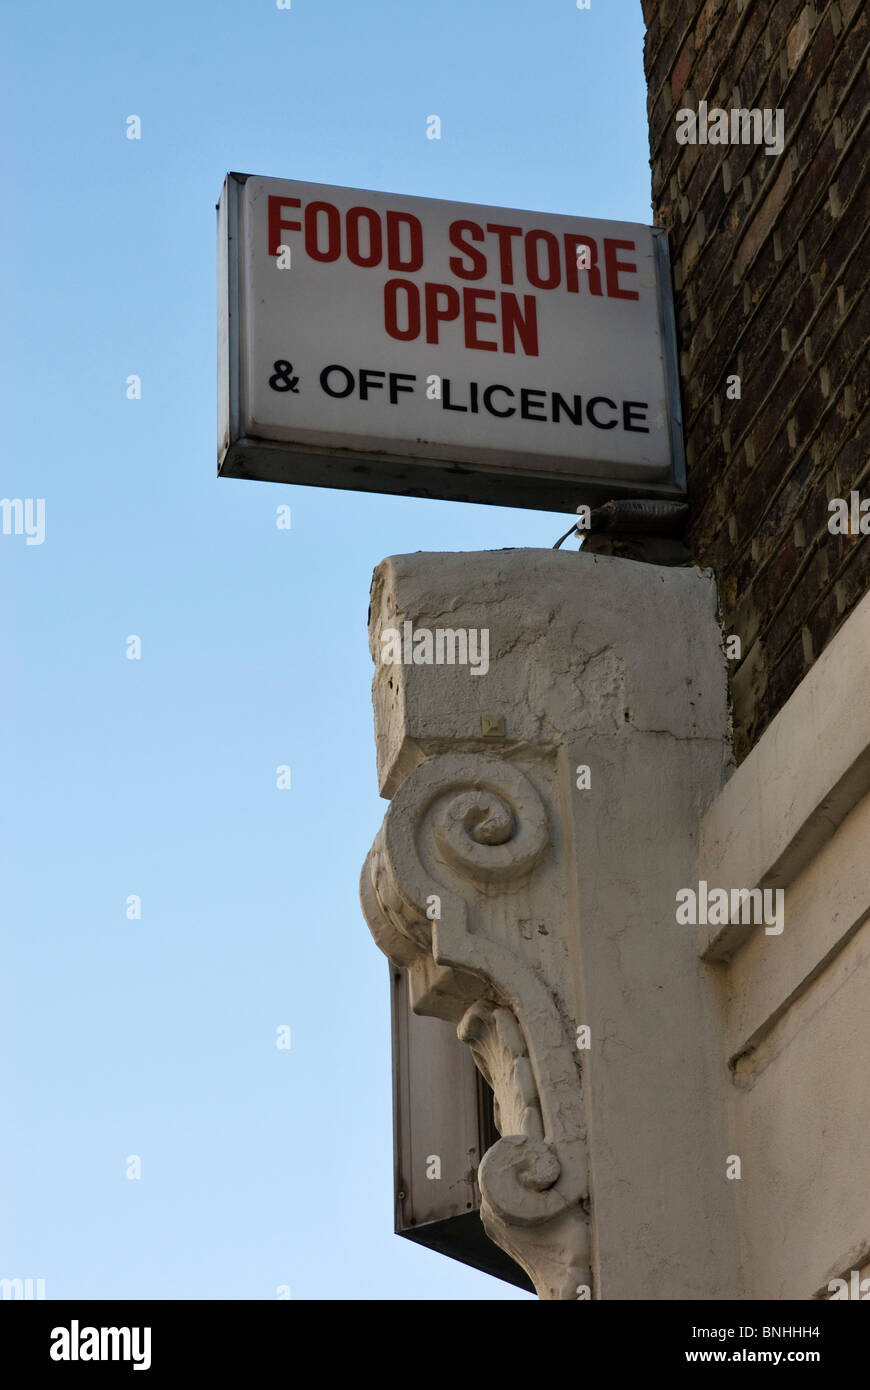 Food store open sign and off licence Stock Photo